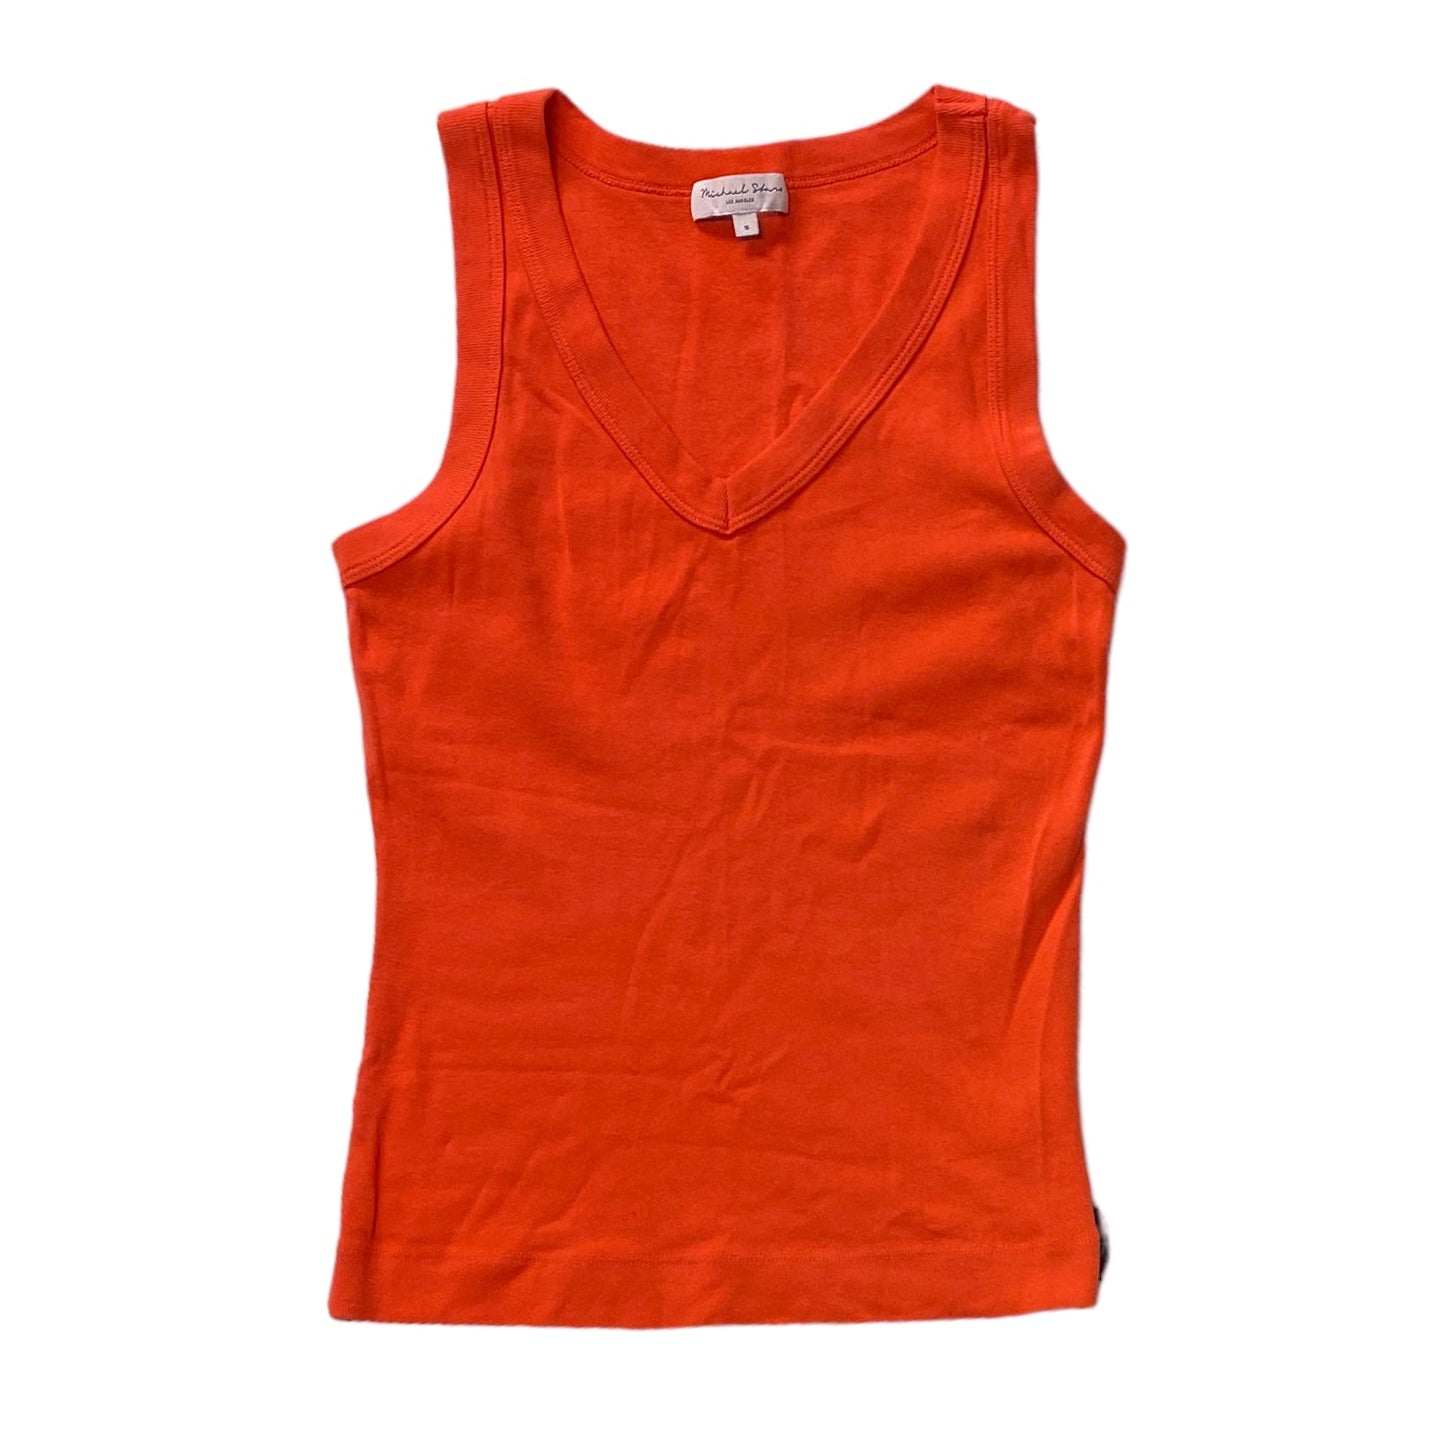 Red Top Sleeveless Michael Stars, Size S